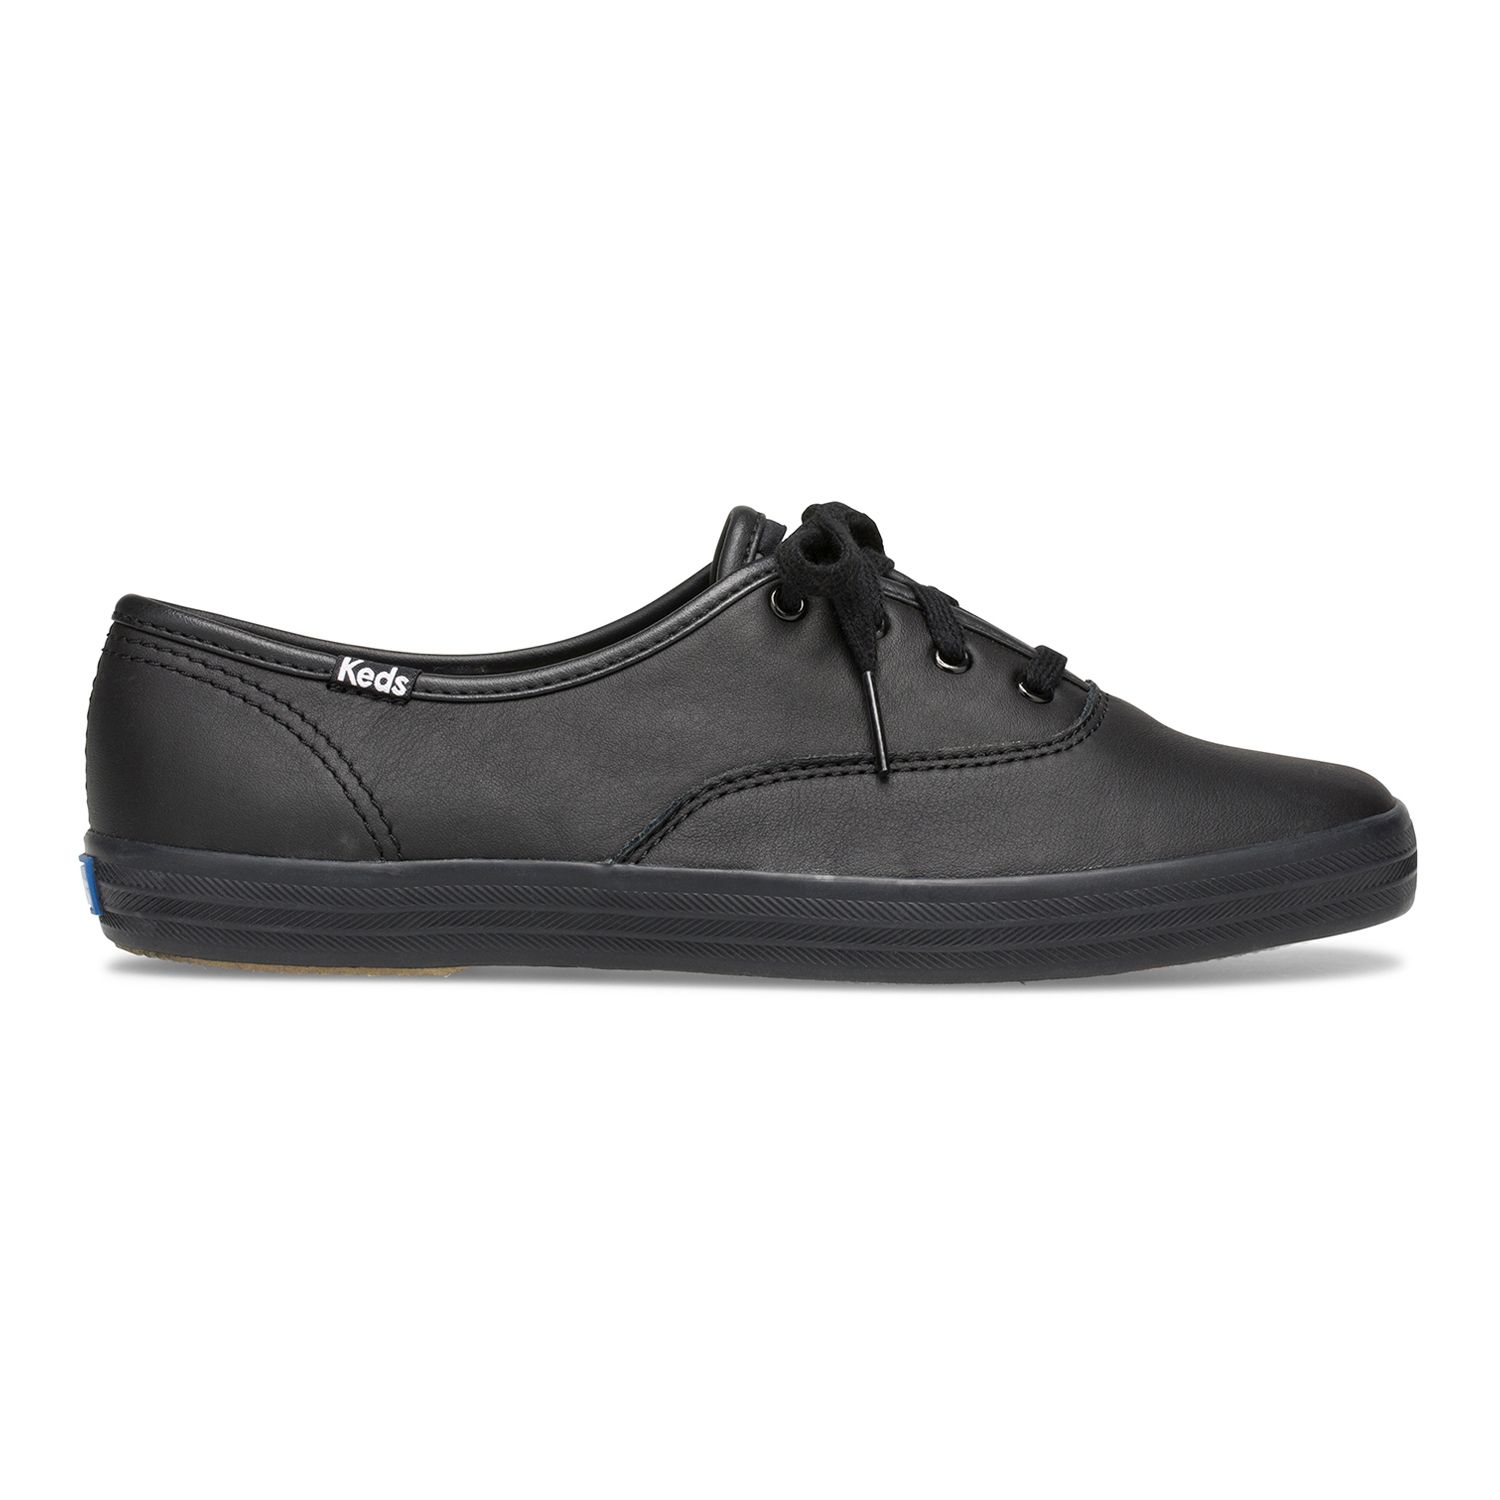 Keds Champion Women's Leather Oxford Shoes